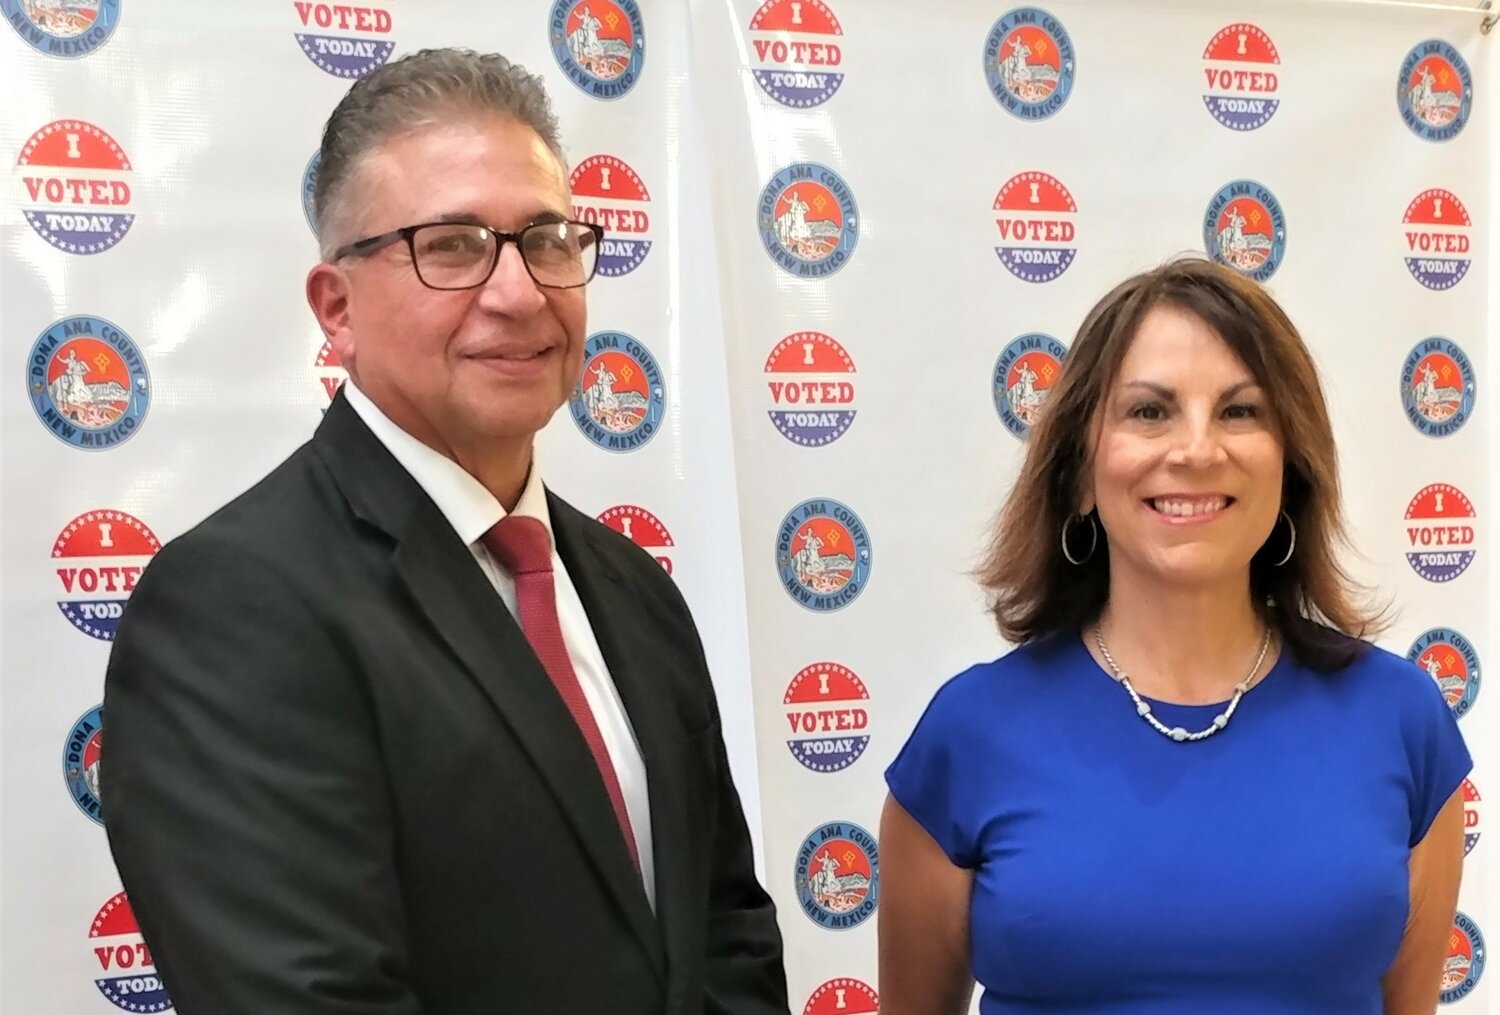 Las Cruces mayoral candidates Eric Enriquez and Kasandra Gandara filed their official candidacy paper work within 15 minutes of each other Tuesday, Aug. 29, at the Doña Ana County Government Center on filing day. As of 11:45, they were the only two candidates who had filed for Las Cruces mayor.